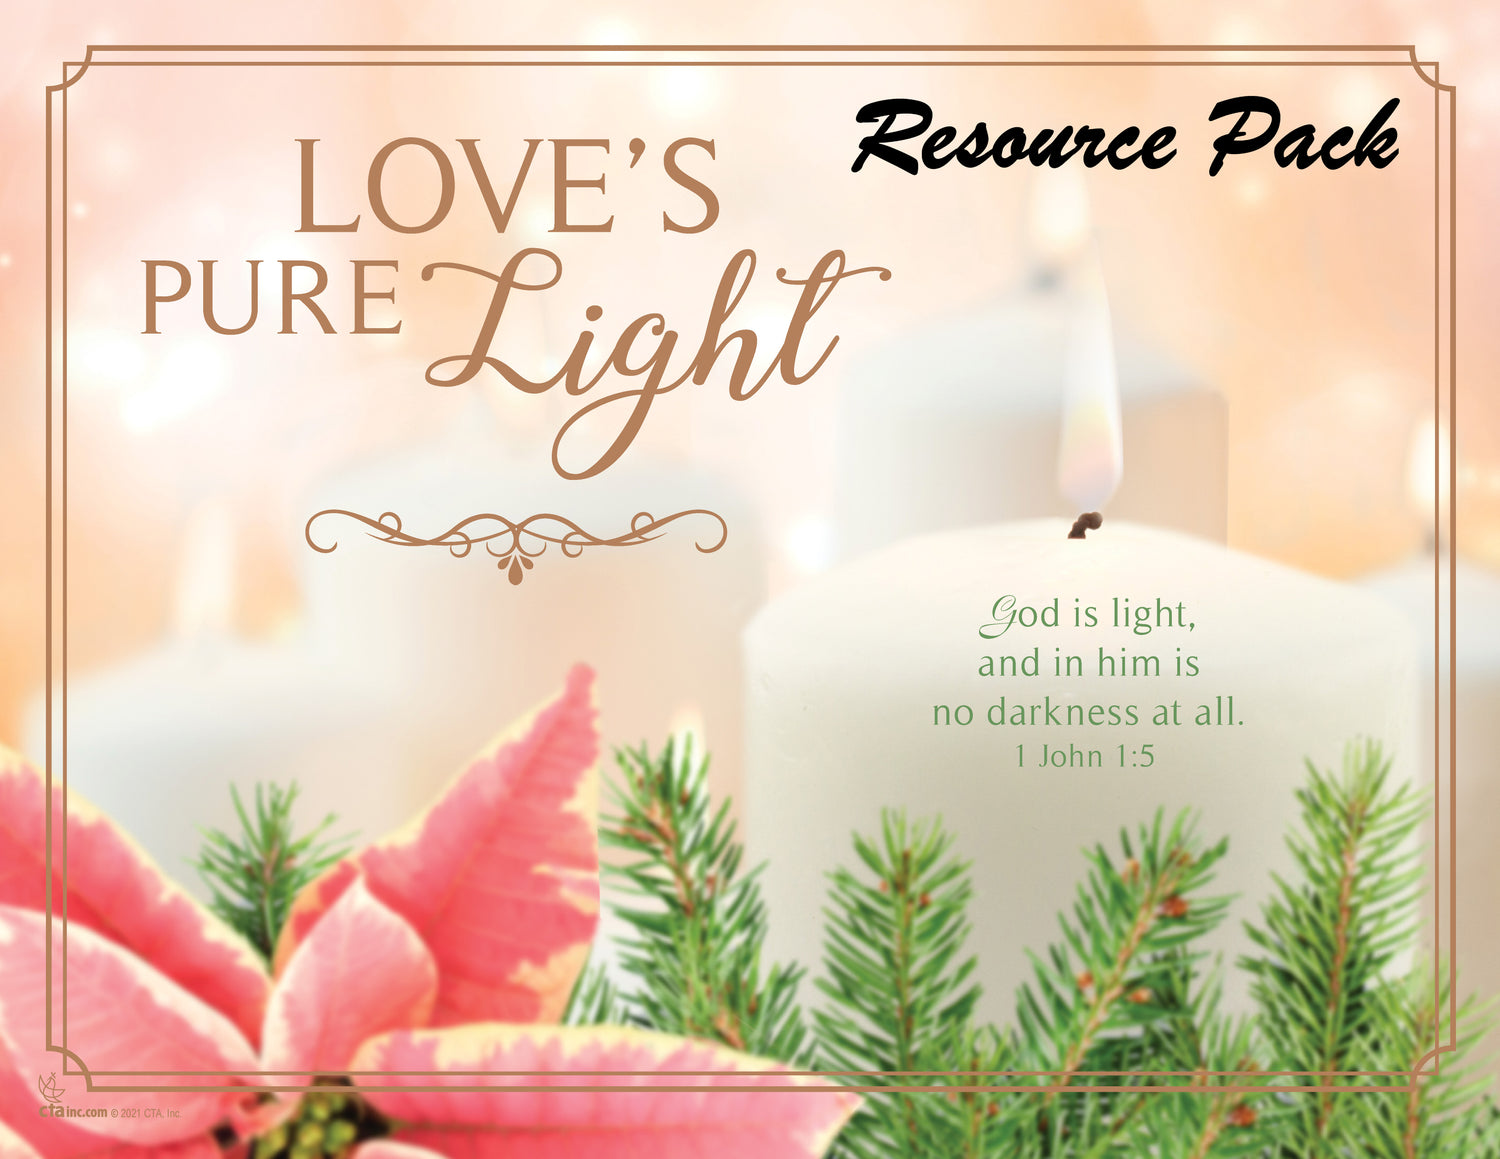 Resource Pack - Love's Pure Light